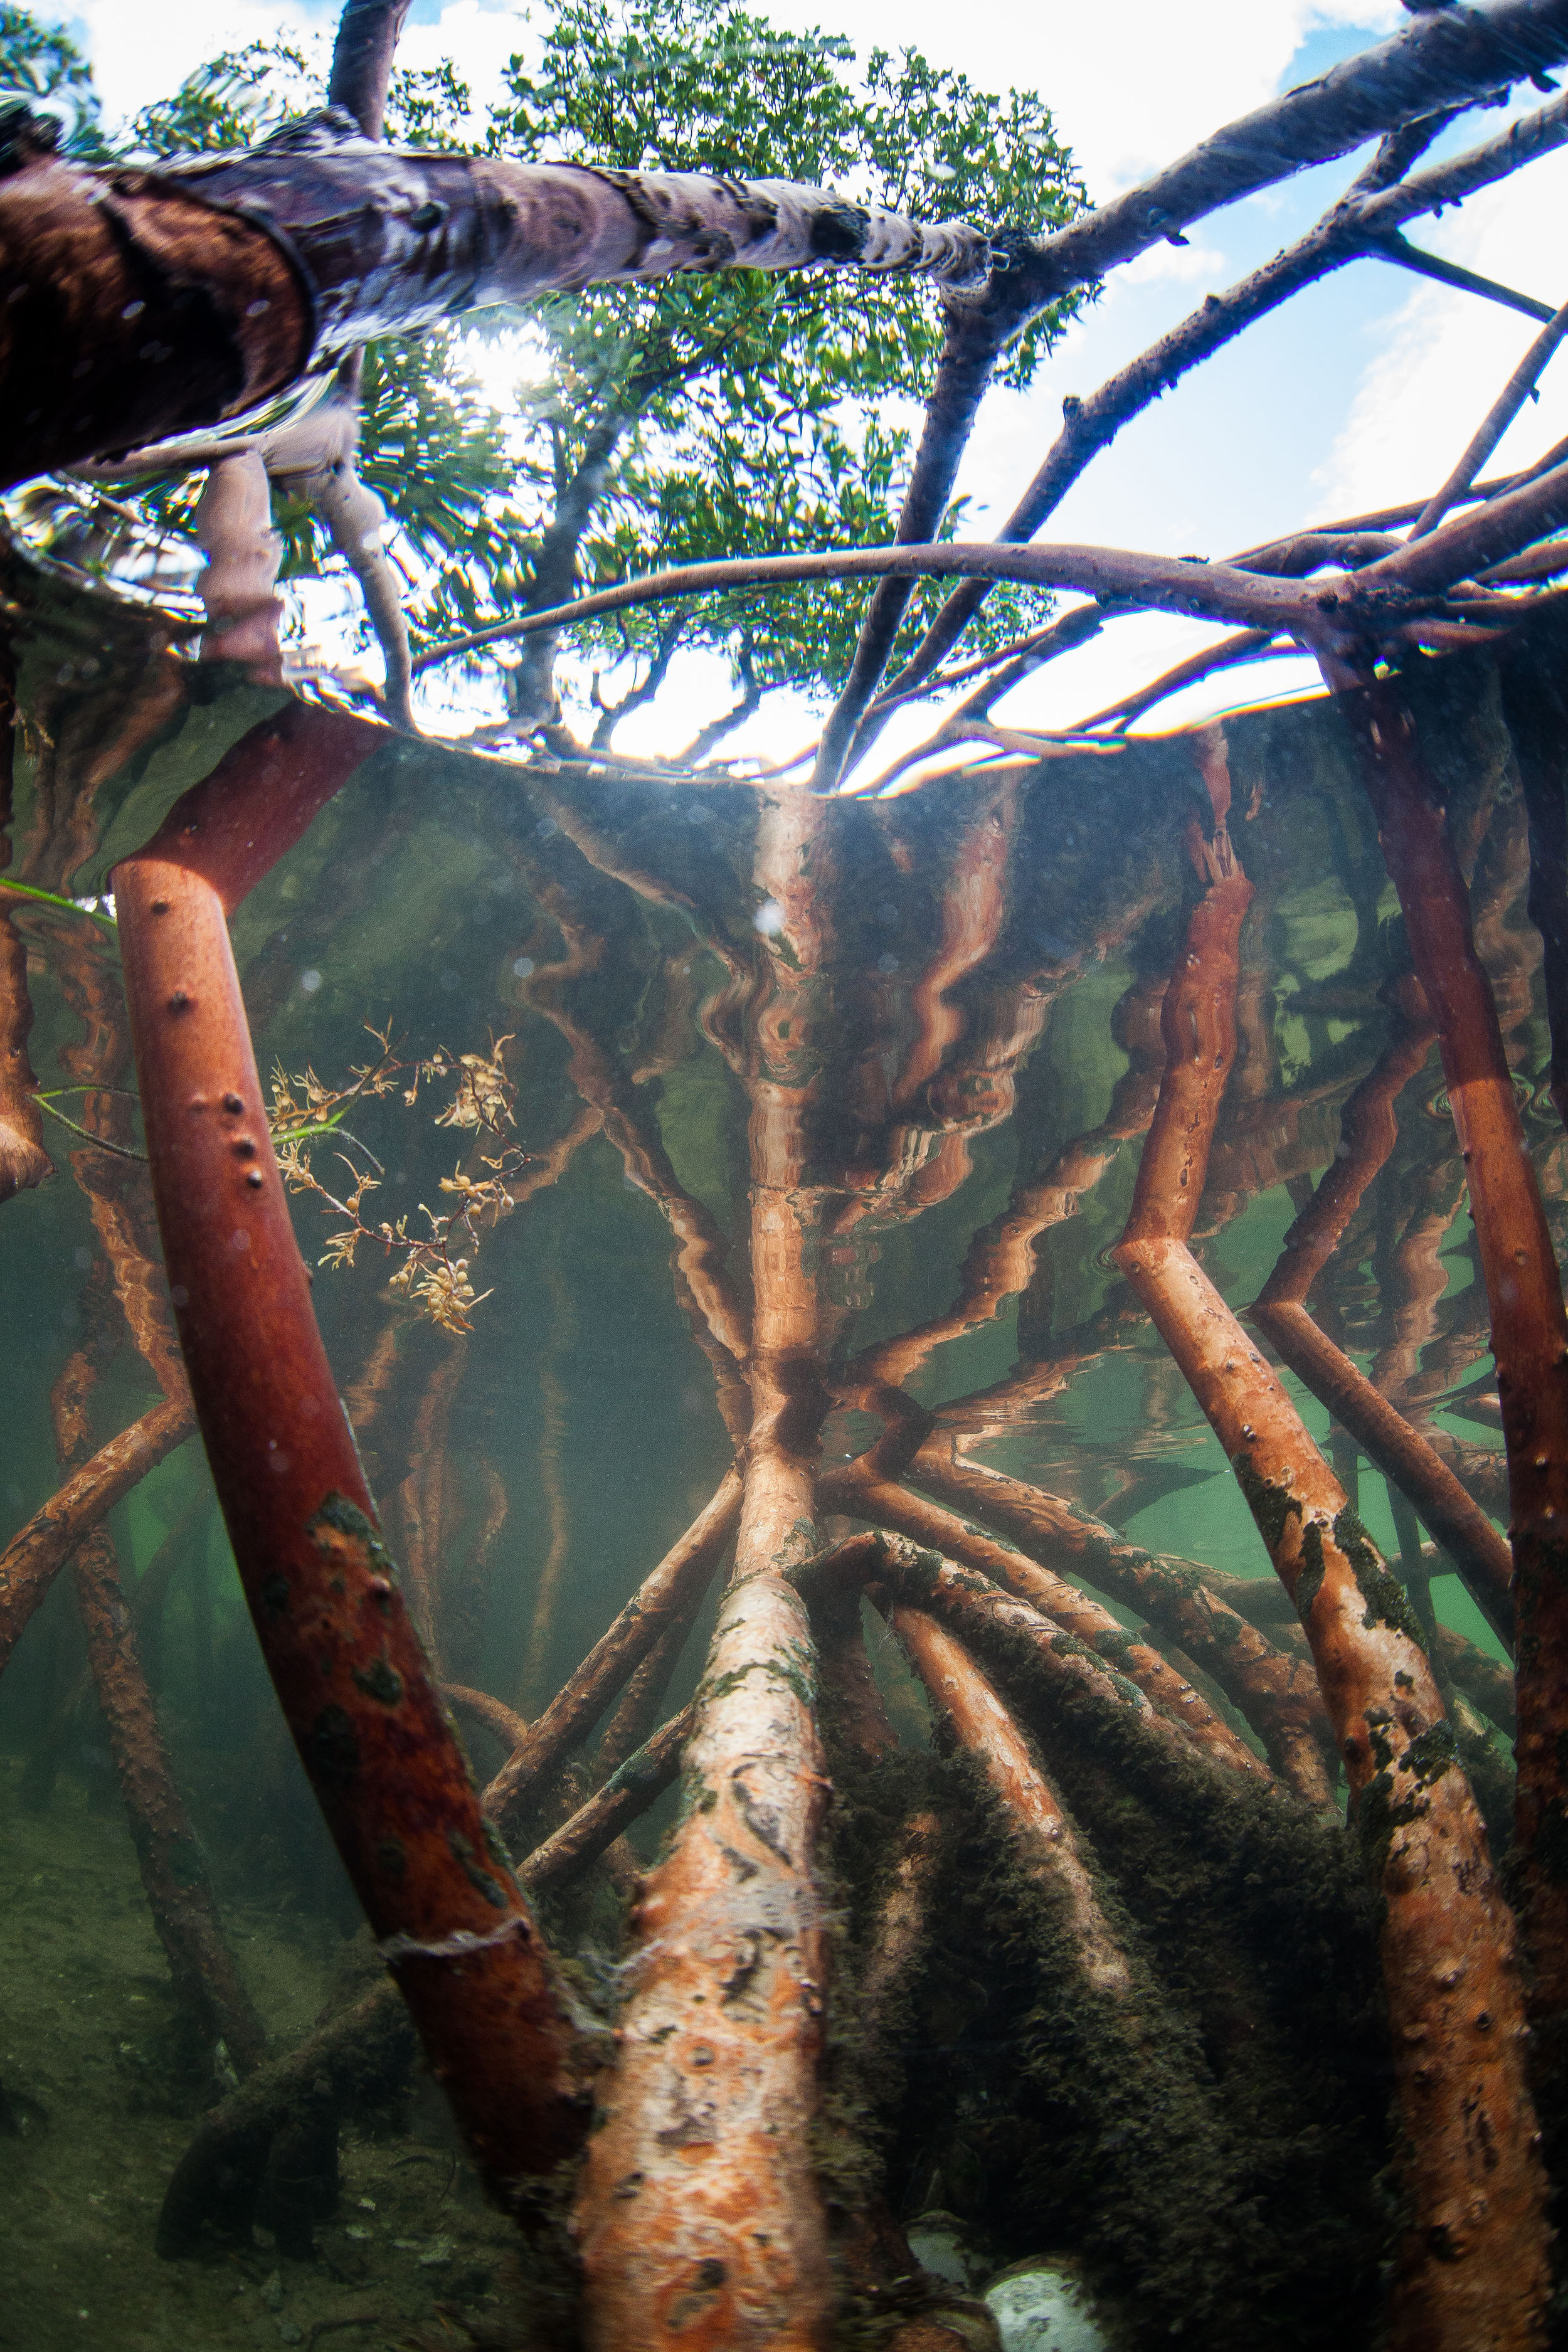 Mangrove roots grow thickly under water. A spreading green canopy is visible high above the surface of the water.